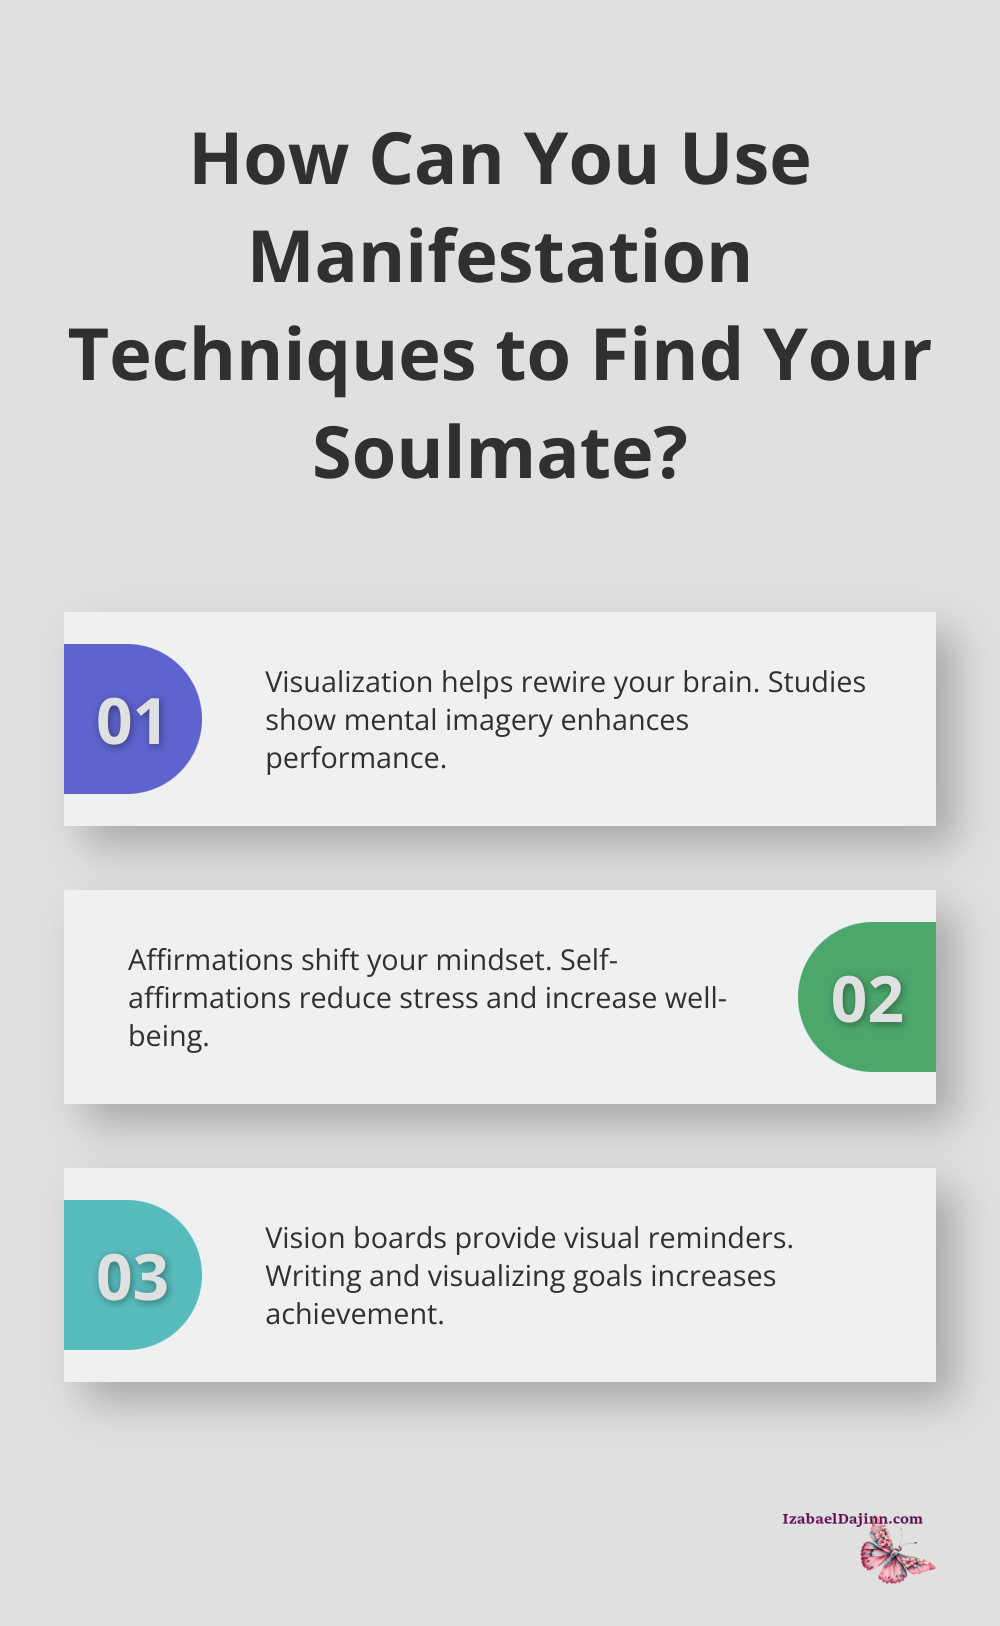 Fact - How Can You Use Manifestation Techniques to Find Your Soulmate?